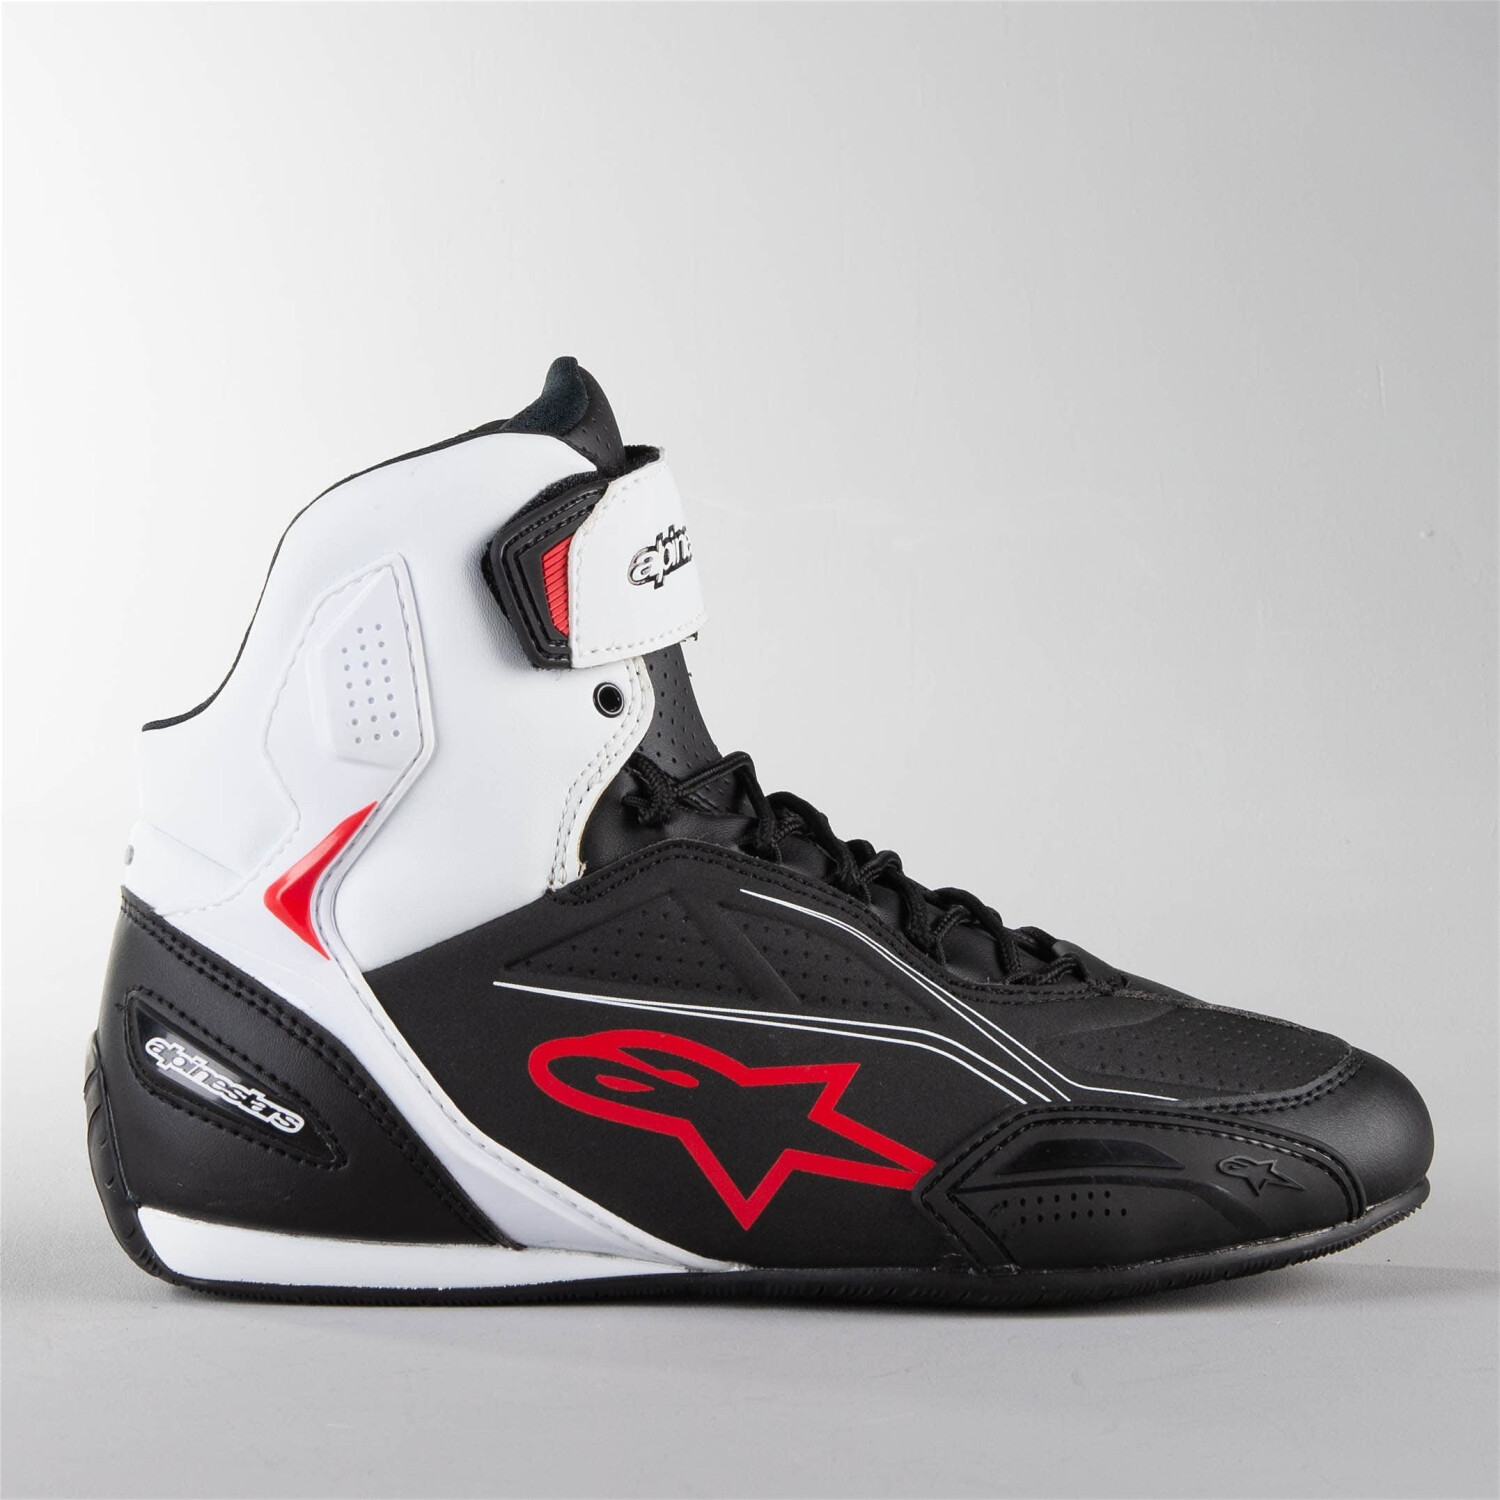 Buy Alpinestars Faster 3 Black/White/Red from £95.39 (Today